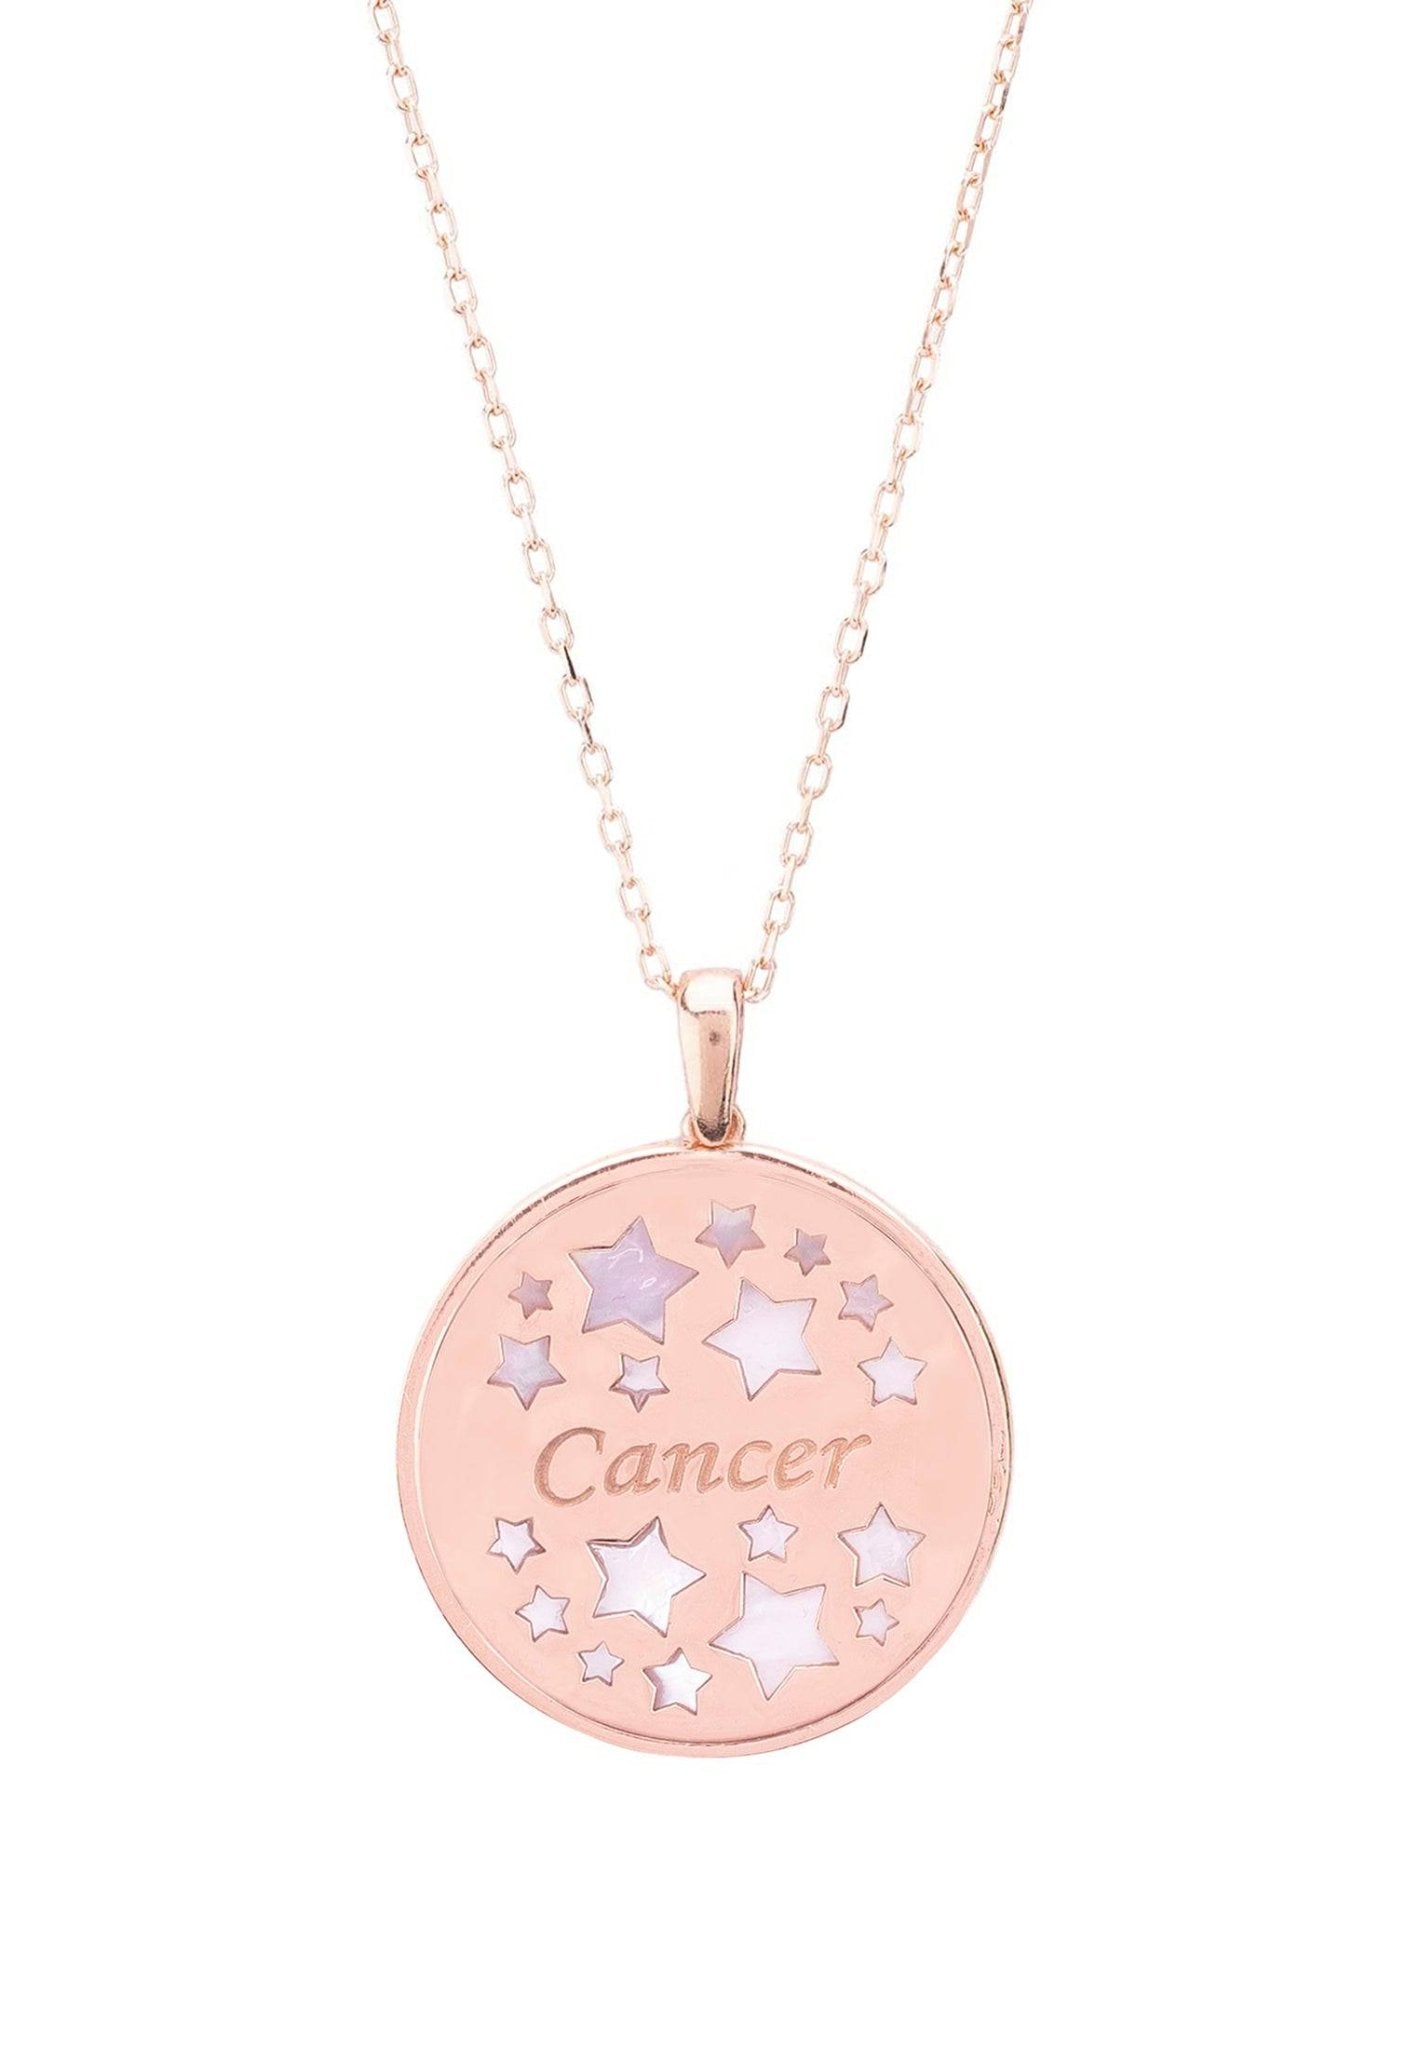 Zodiac Mother Of Pearl Gemstone Star Constellation Pendant Necklace Cancer - LATELITA Necklaces